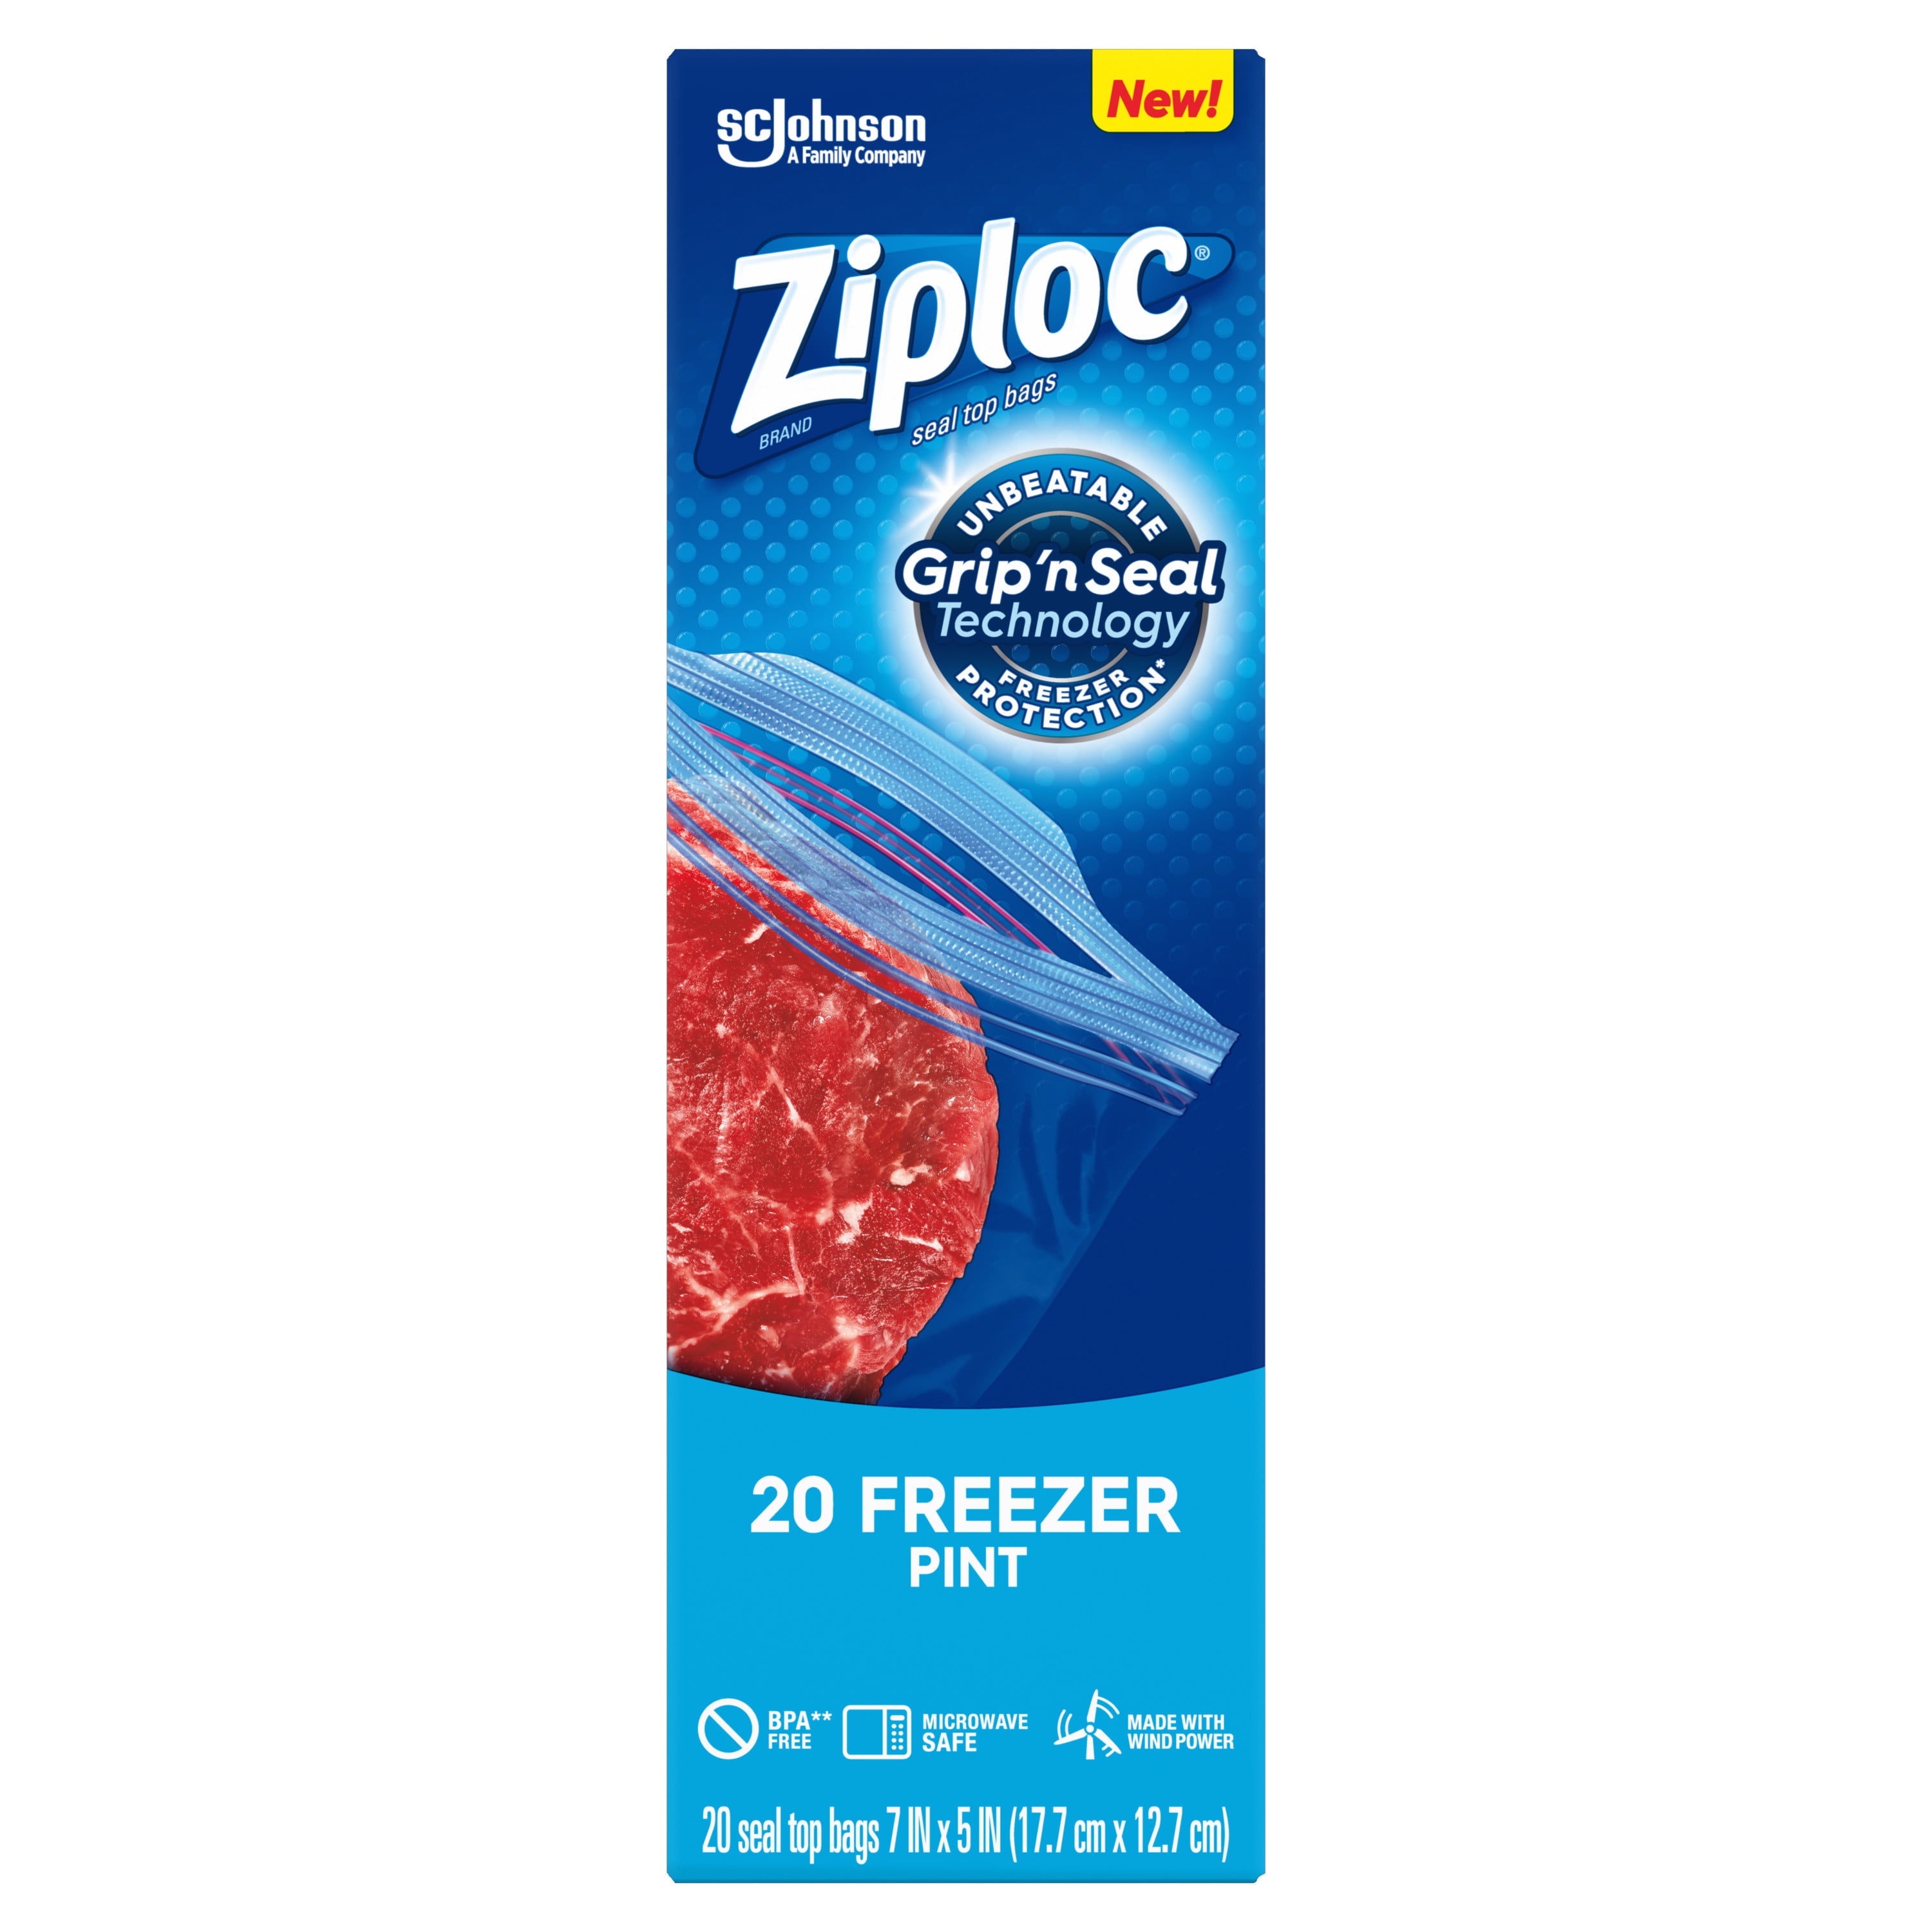 Ziploc Brand Freezer Pint Bags with Grip 'n Seal Technology, 20 Count ...